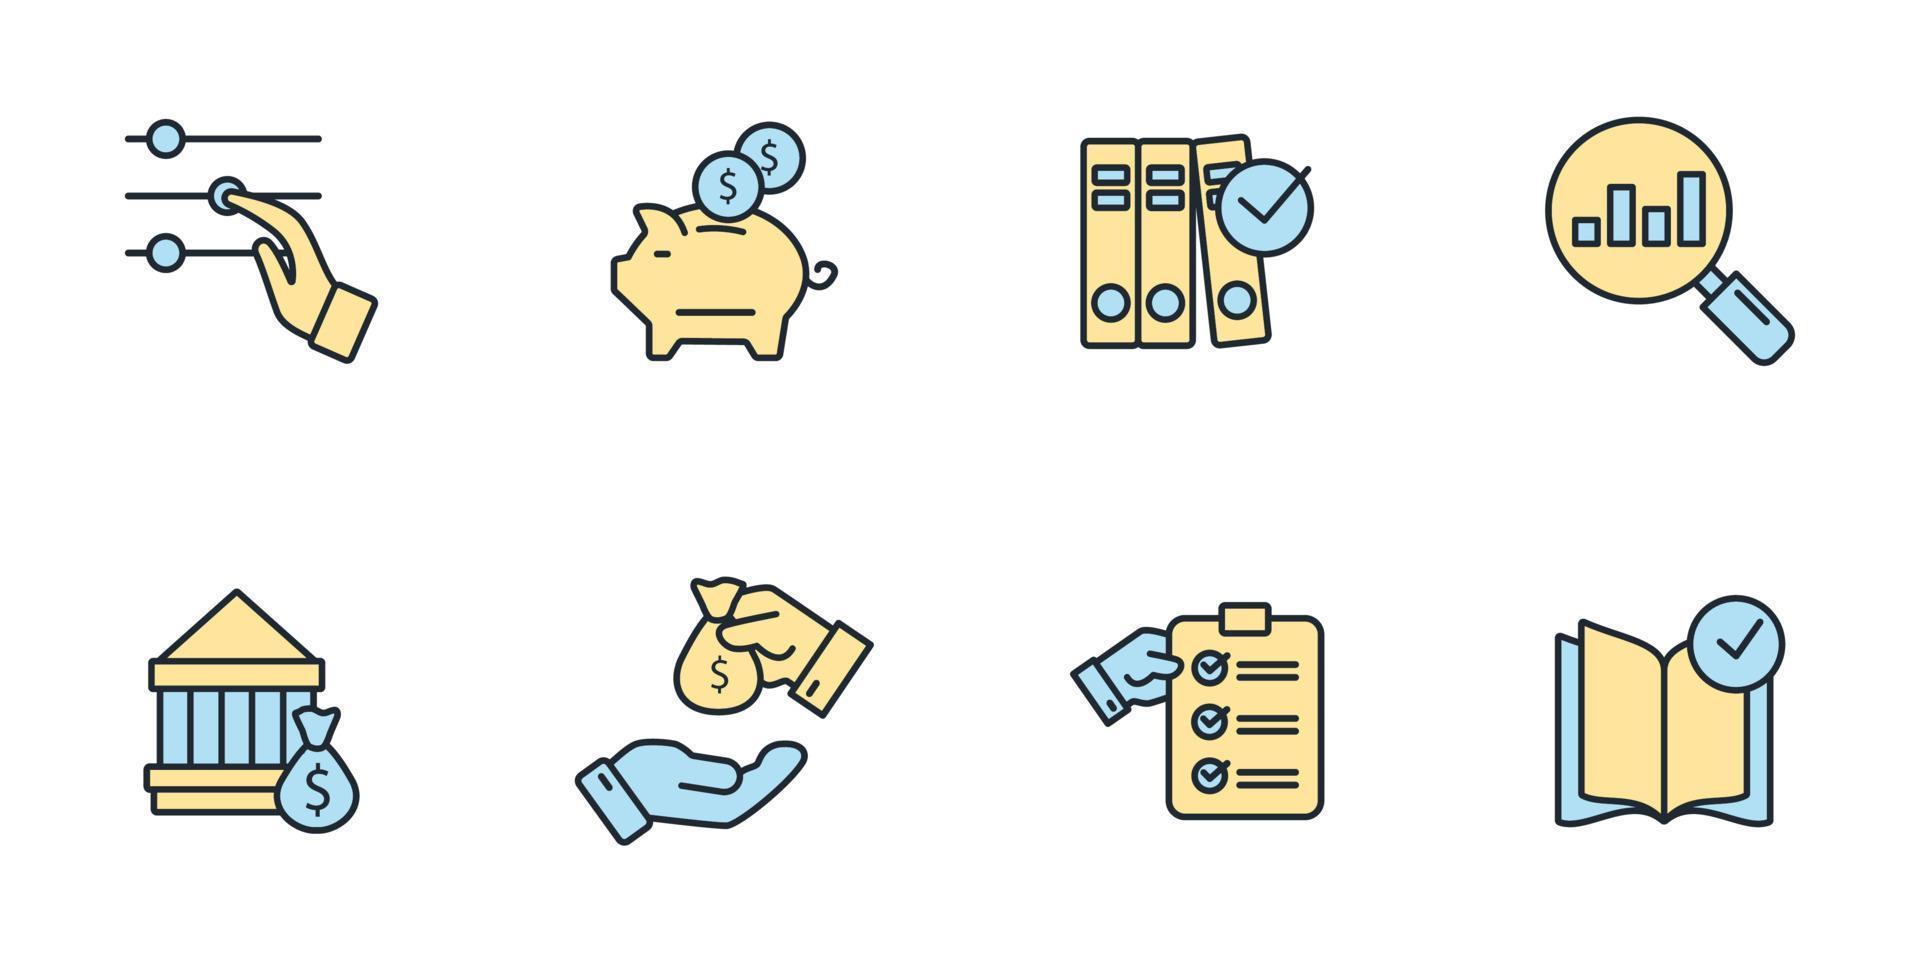 budget. Planning, Saving, Investment and Control  icons  symbol vector elements for infographic web